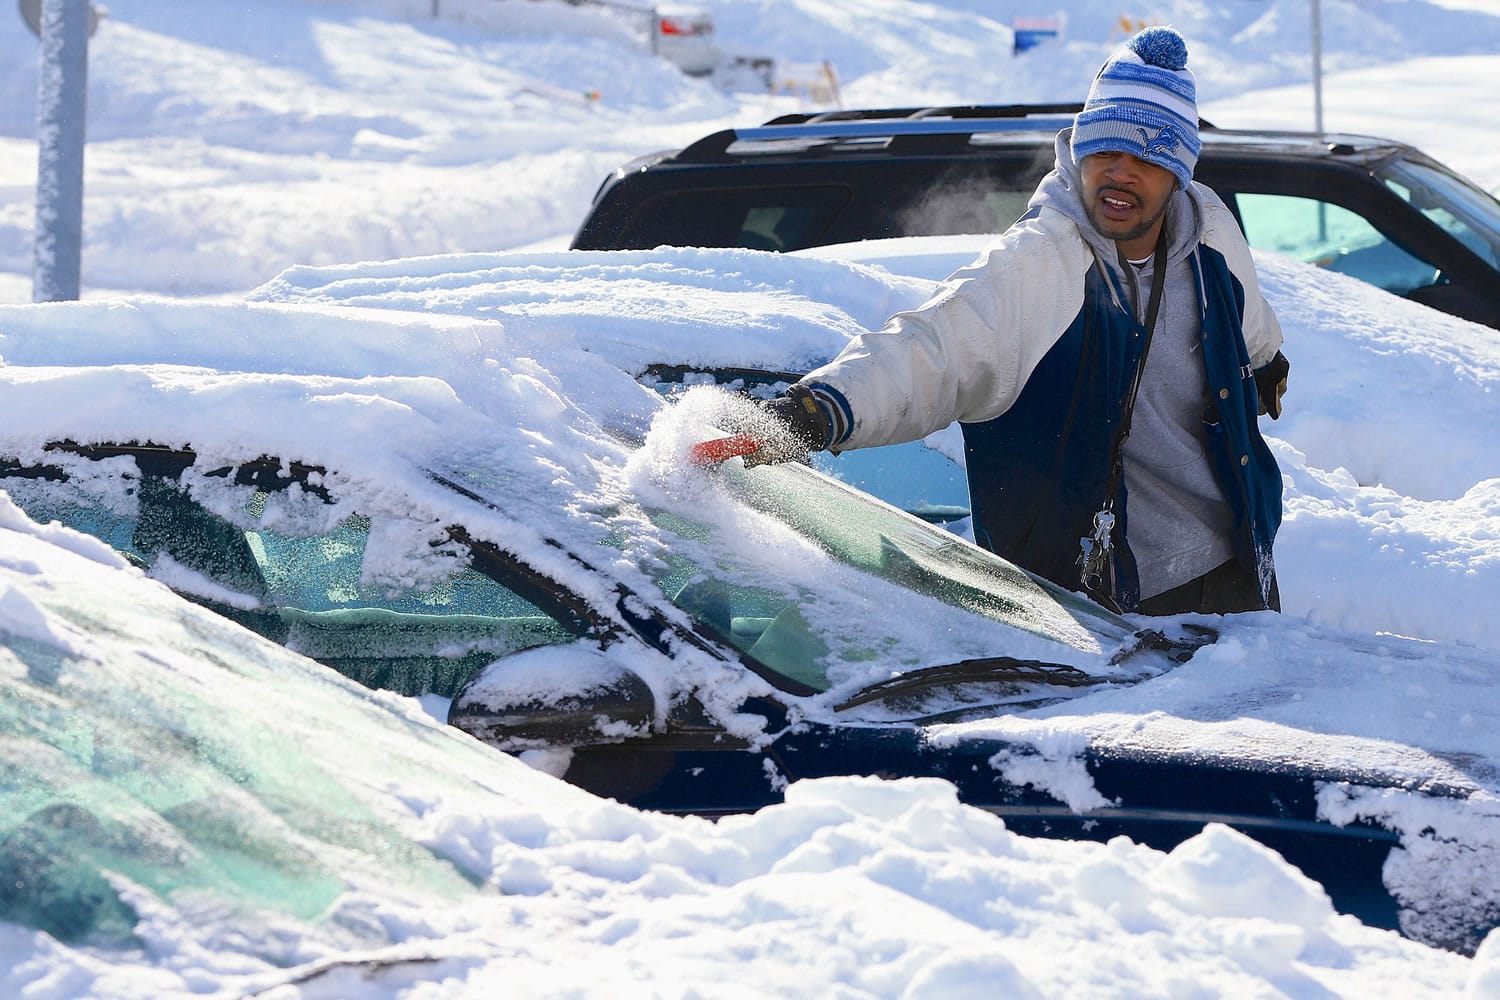 Nikita Smith removes snow and ice from his car Monday in Omaha, Neb., after a winter storm dumped around 9 inches of snow over the weekend.